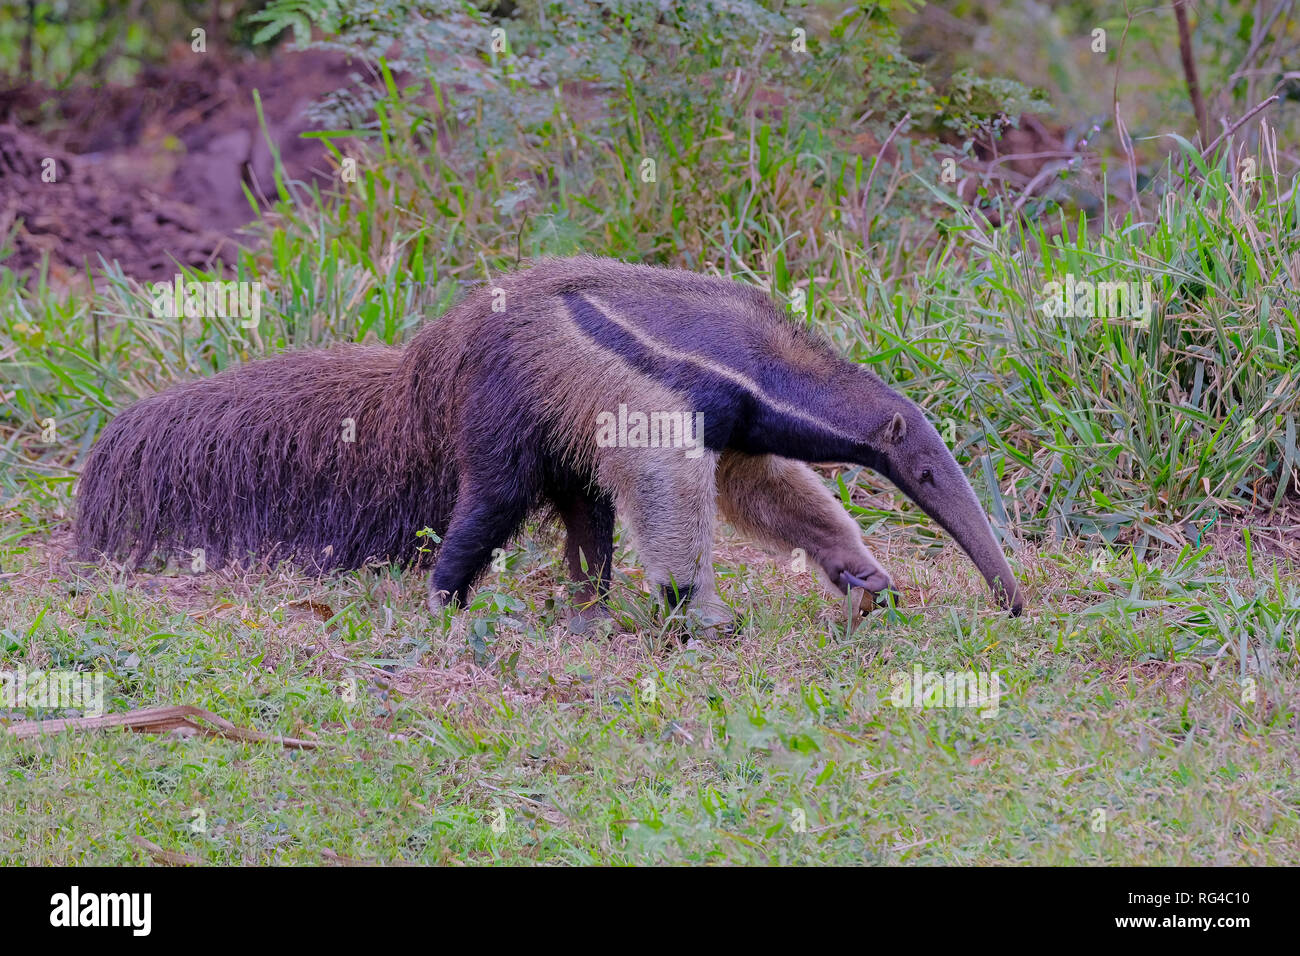 Giant Anteater, Myrmecophaga Tridactyla, also known as the Ant Bear, Matto Grosso Do Sul, Pantanal, Brazil Stock Photo